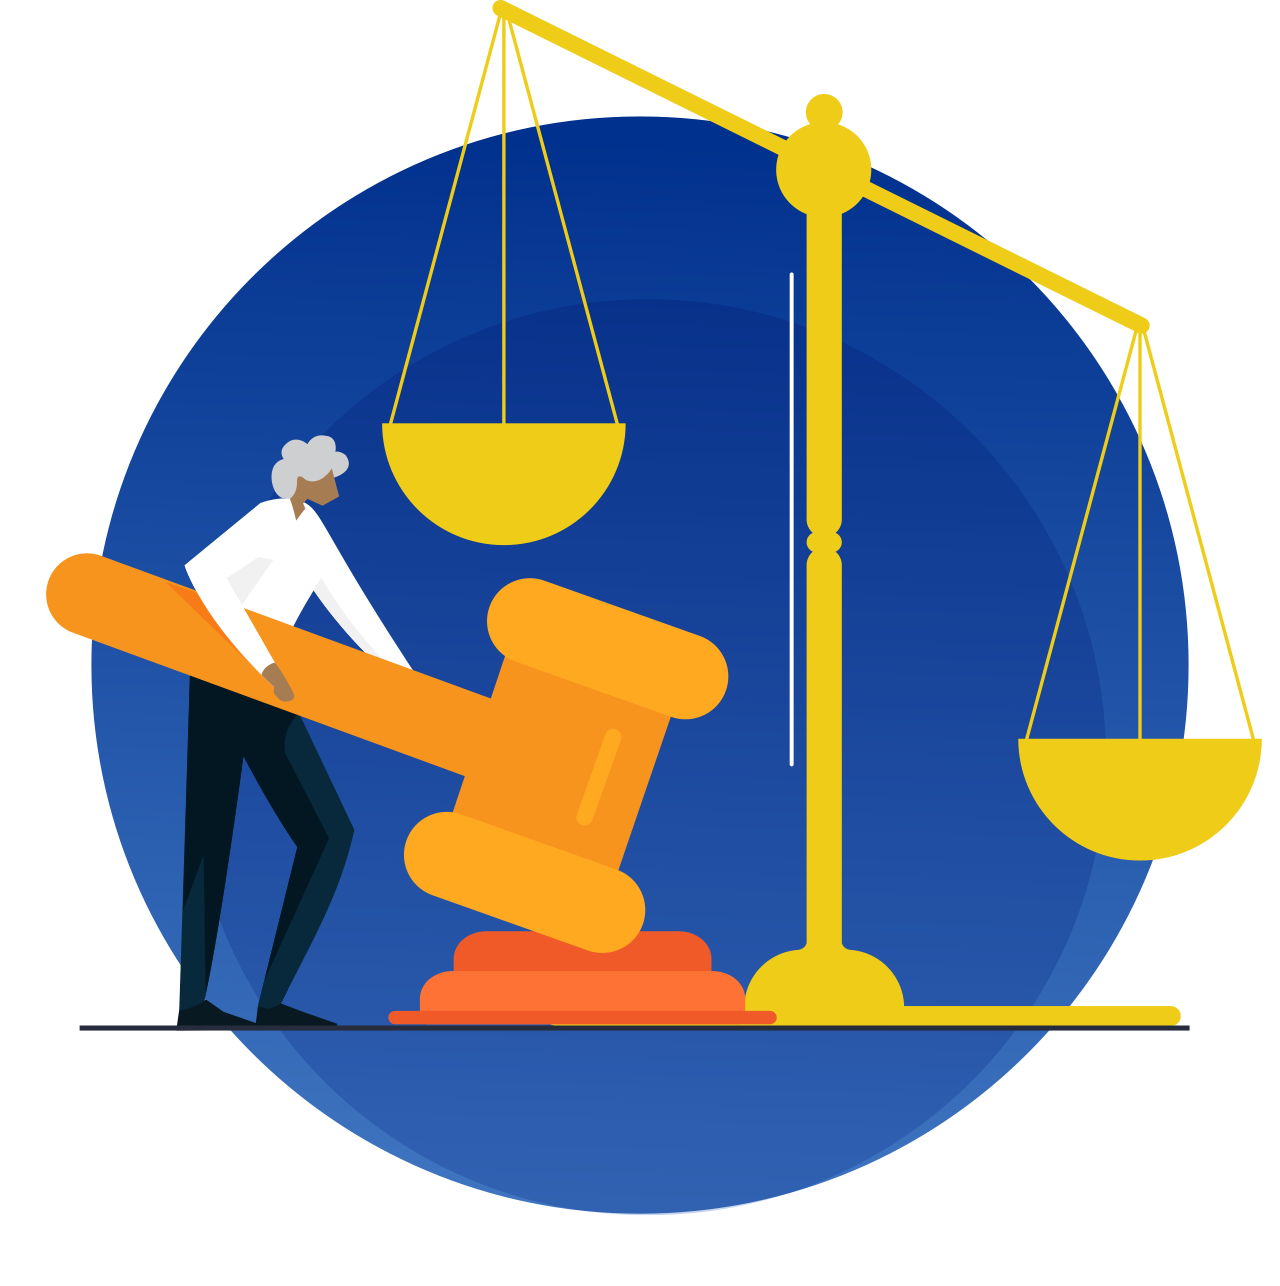 Graphic of a woman holding a giant gavel.  Behind her is a large balance